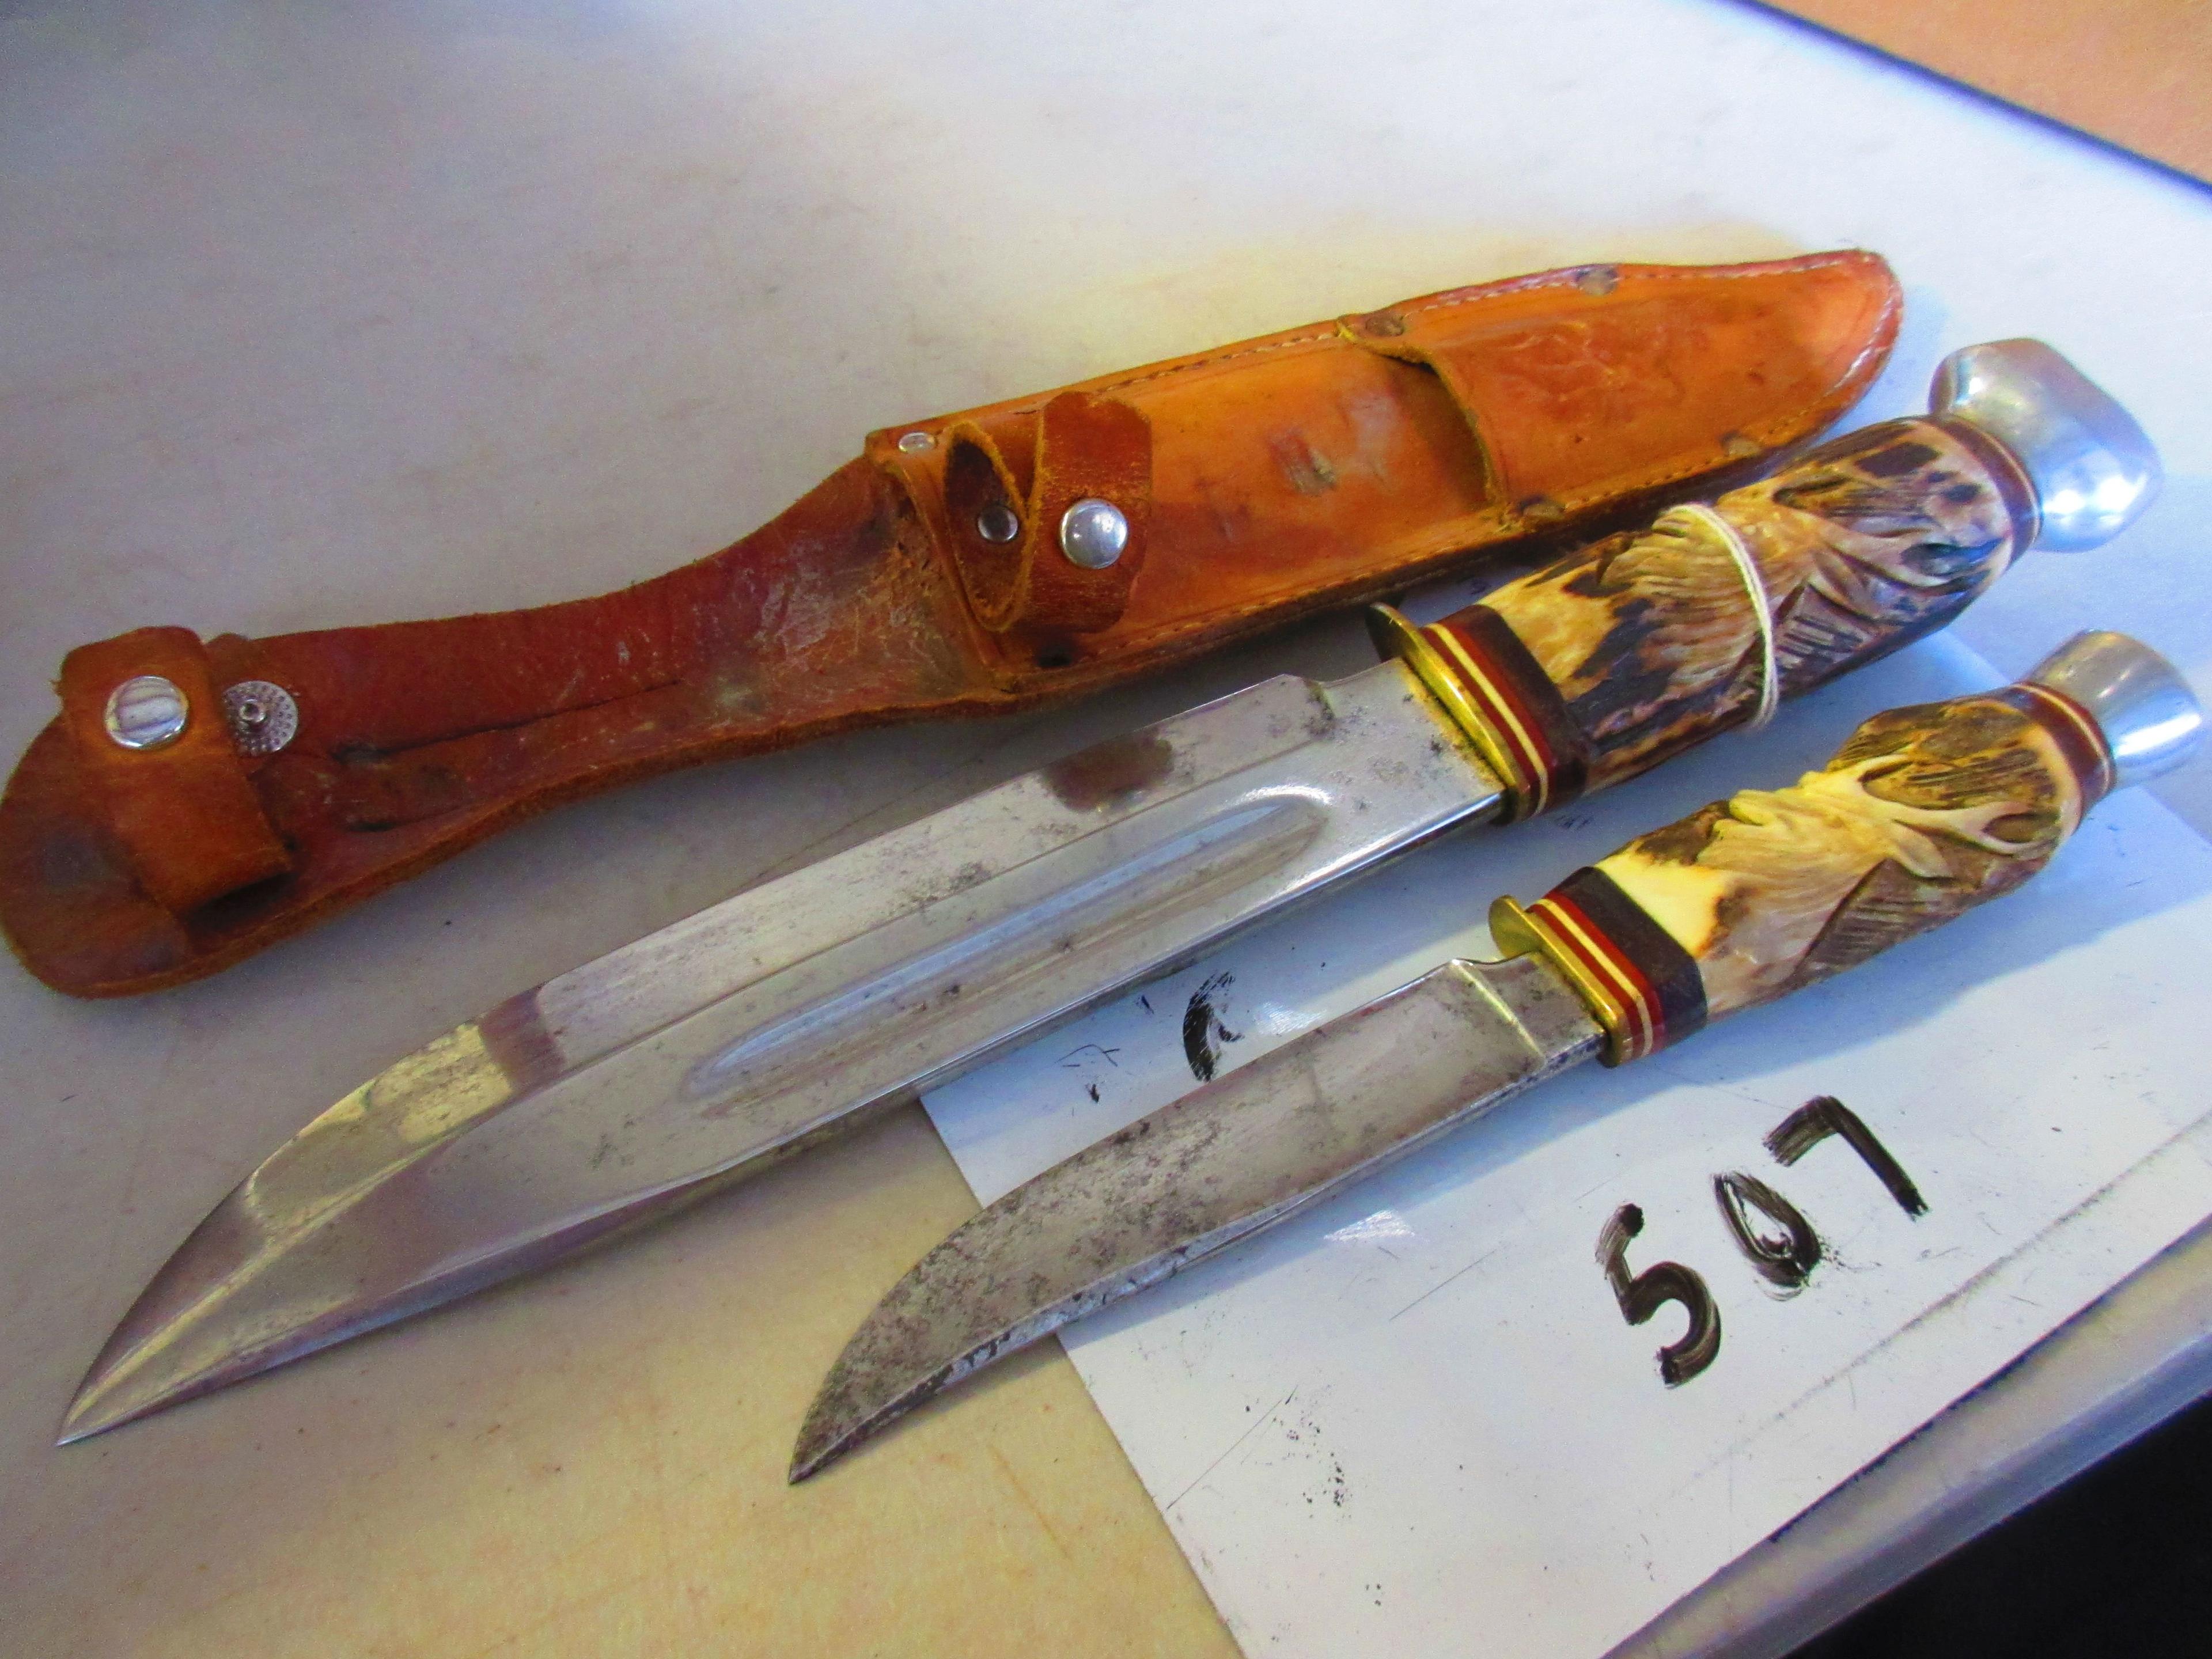 W. WILLMS SOLINGEN 2 KNIFE SET IN SHEATH AWSOME HAND CARVED STAG HANDLES VERY NICE SET